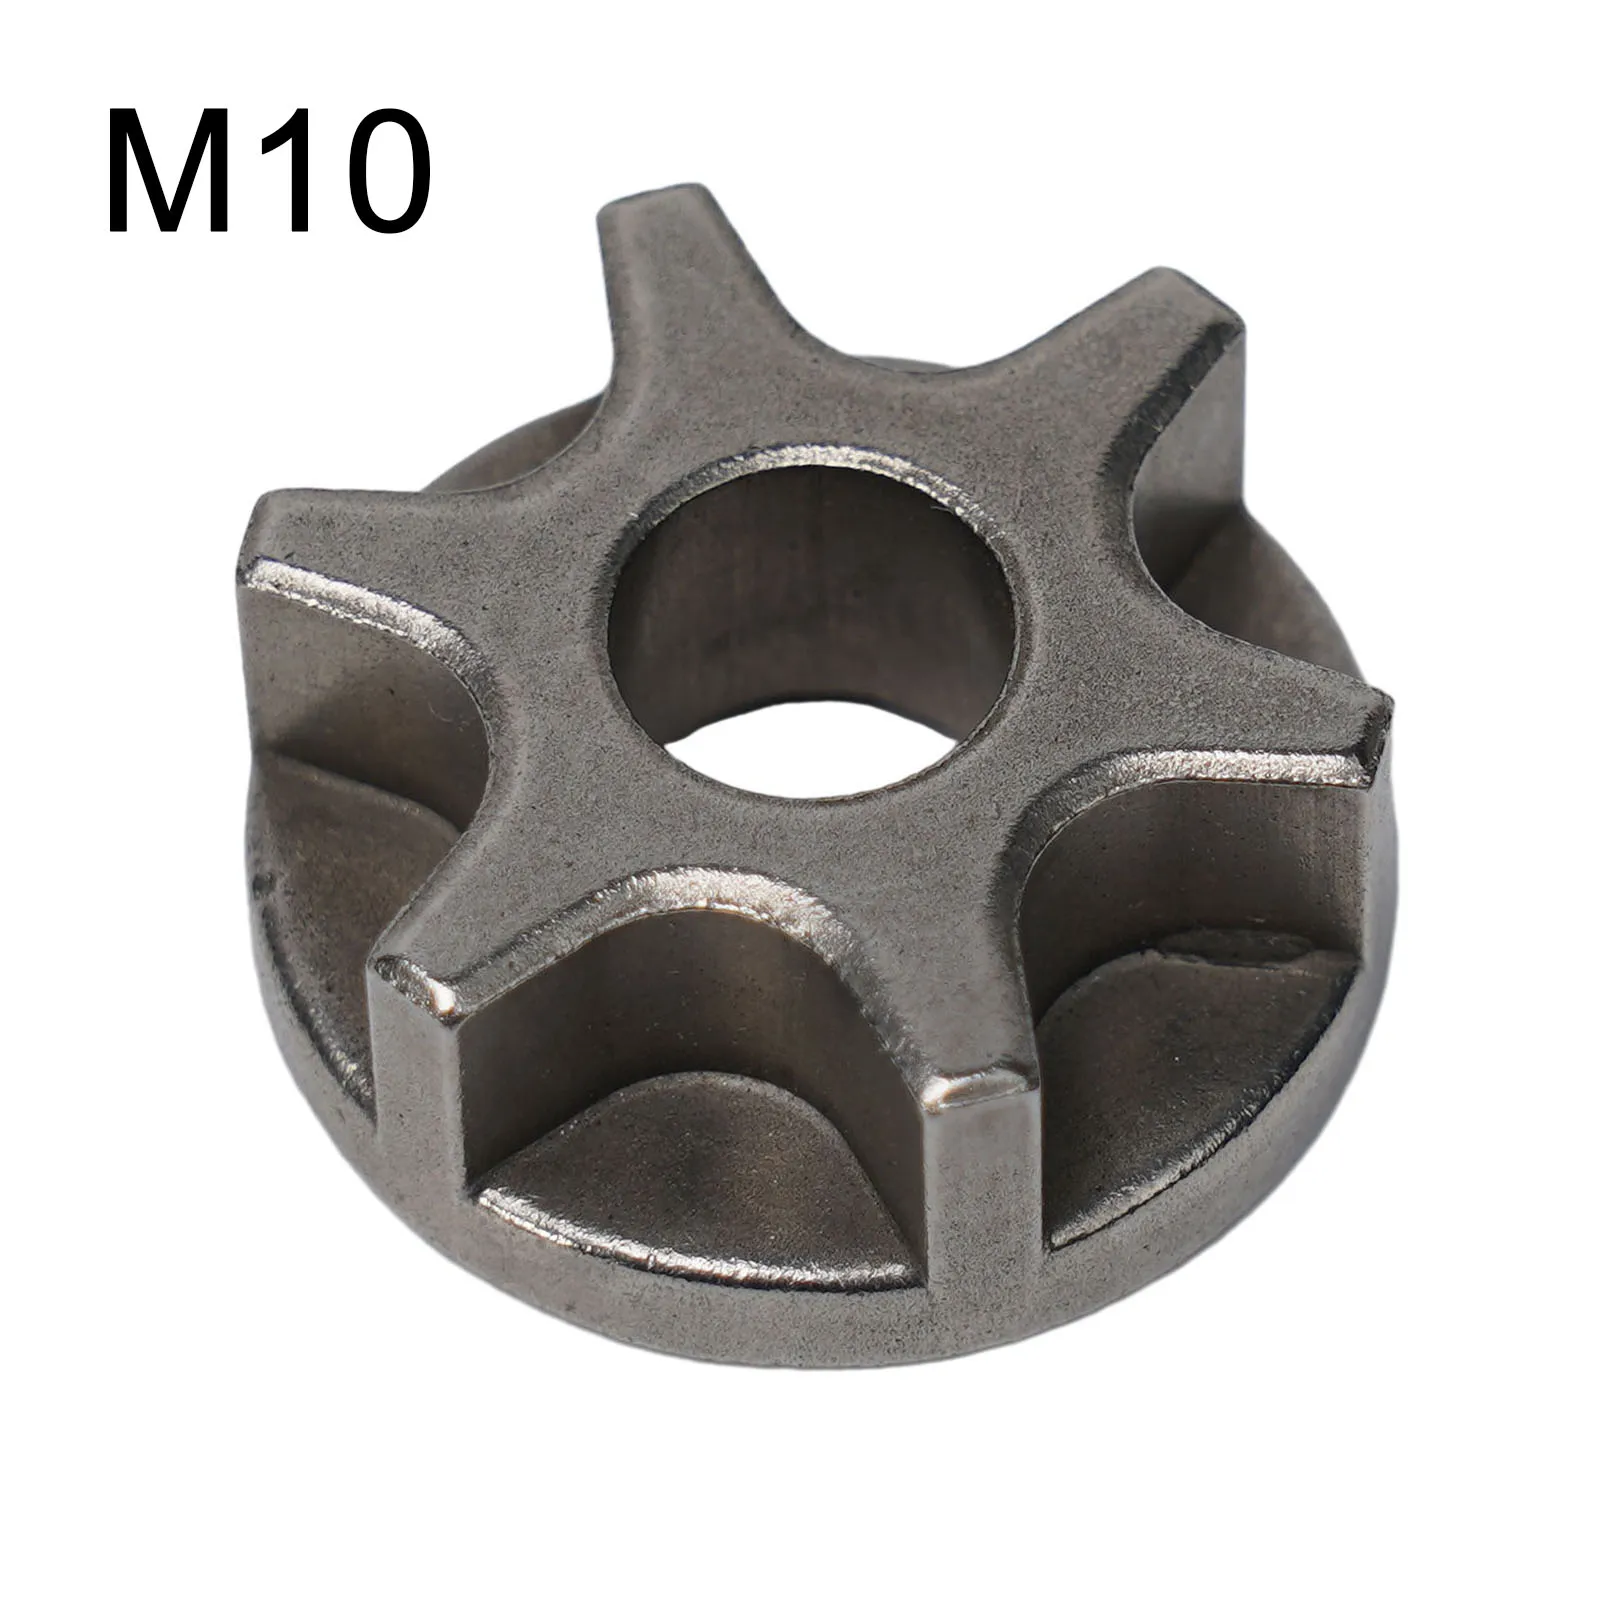 1pc M10 M14 M16 Sprocket Chain Saw Gear For 100 115 125 150 180 Angle Grinder Replacement Gear Chainsaw Bracket Part хлыст для снятия кассеты topeak chain whip sprocket remover tps sp21